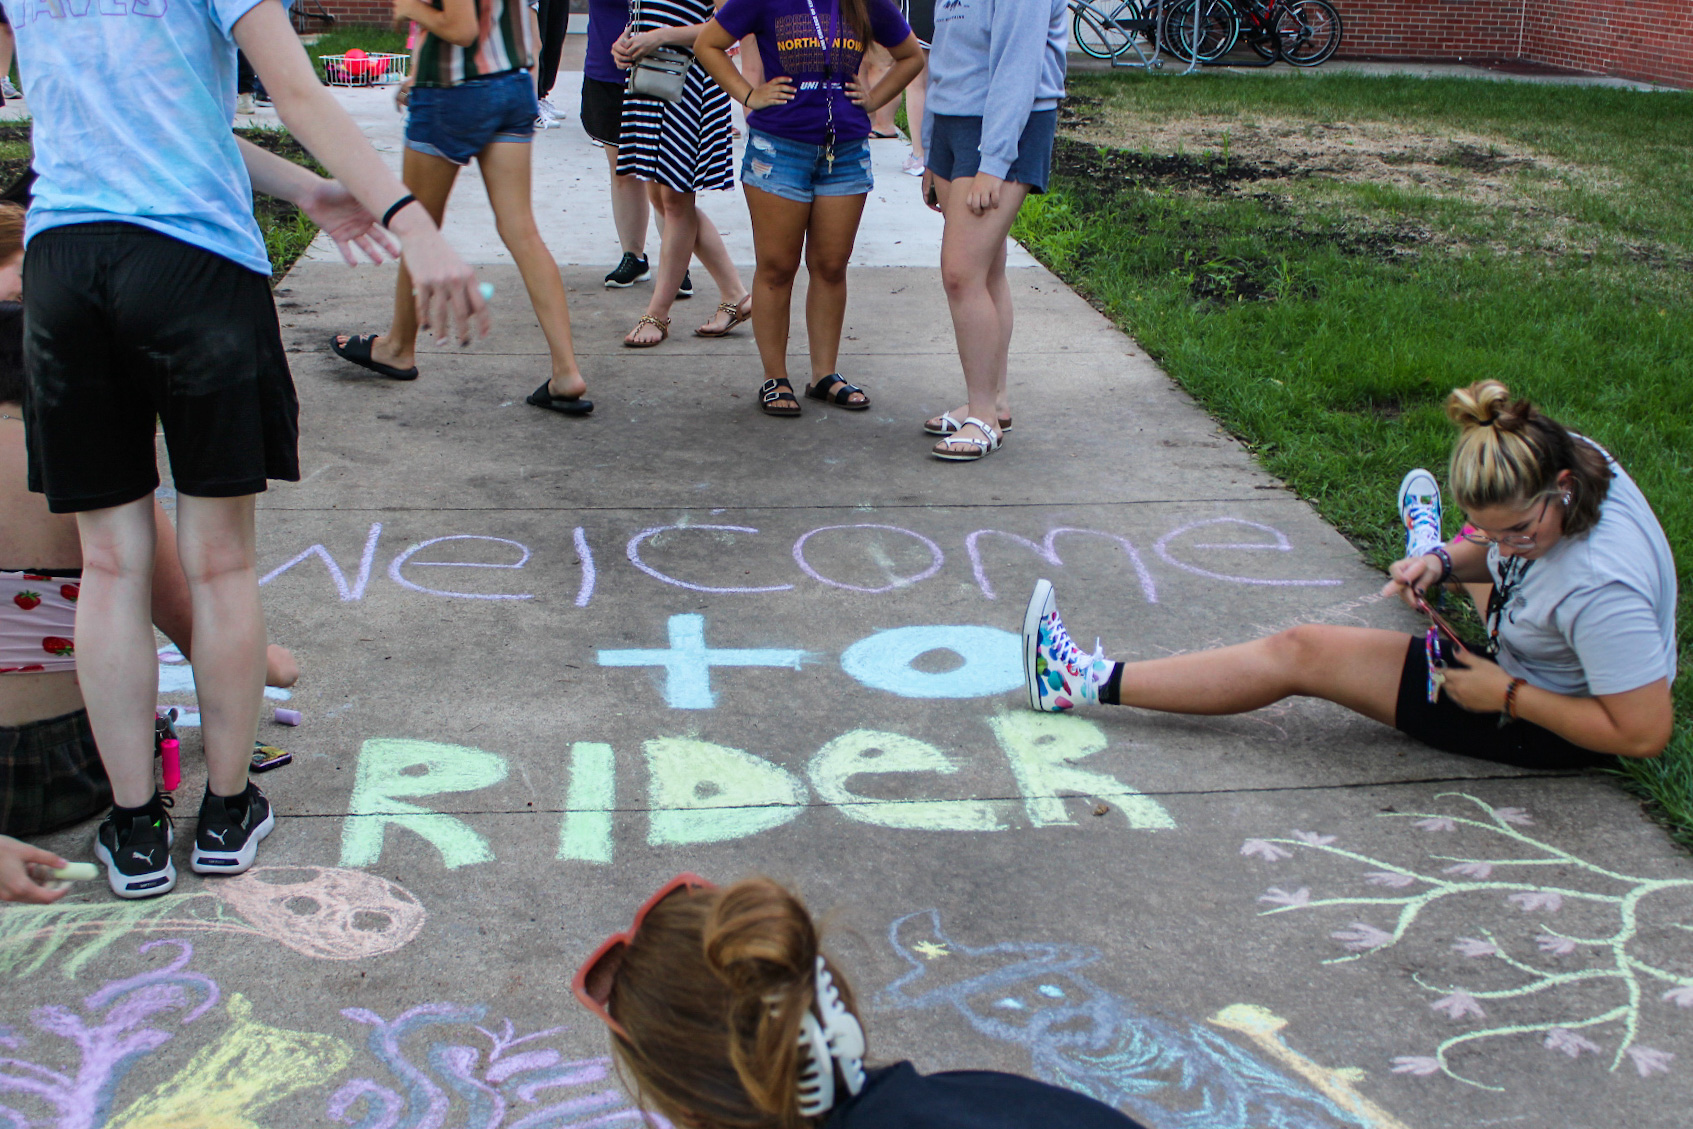 Chalking on campus